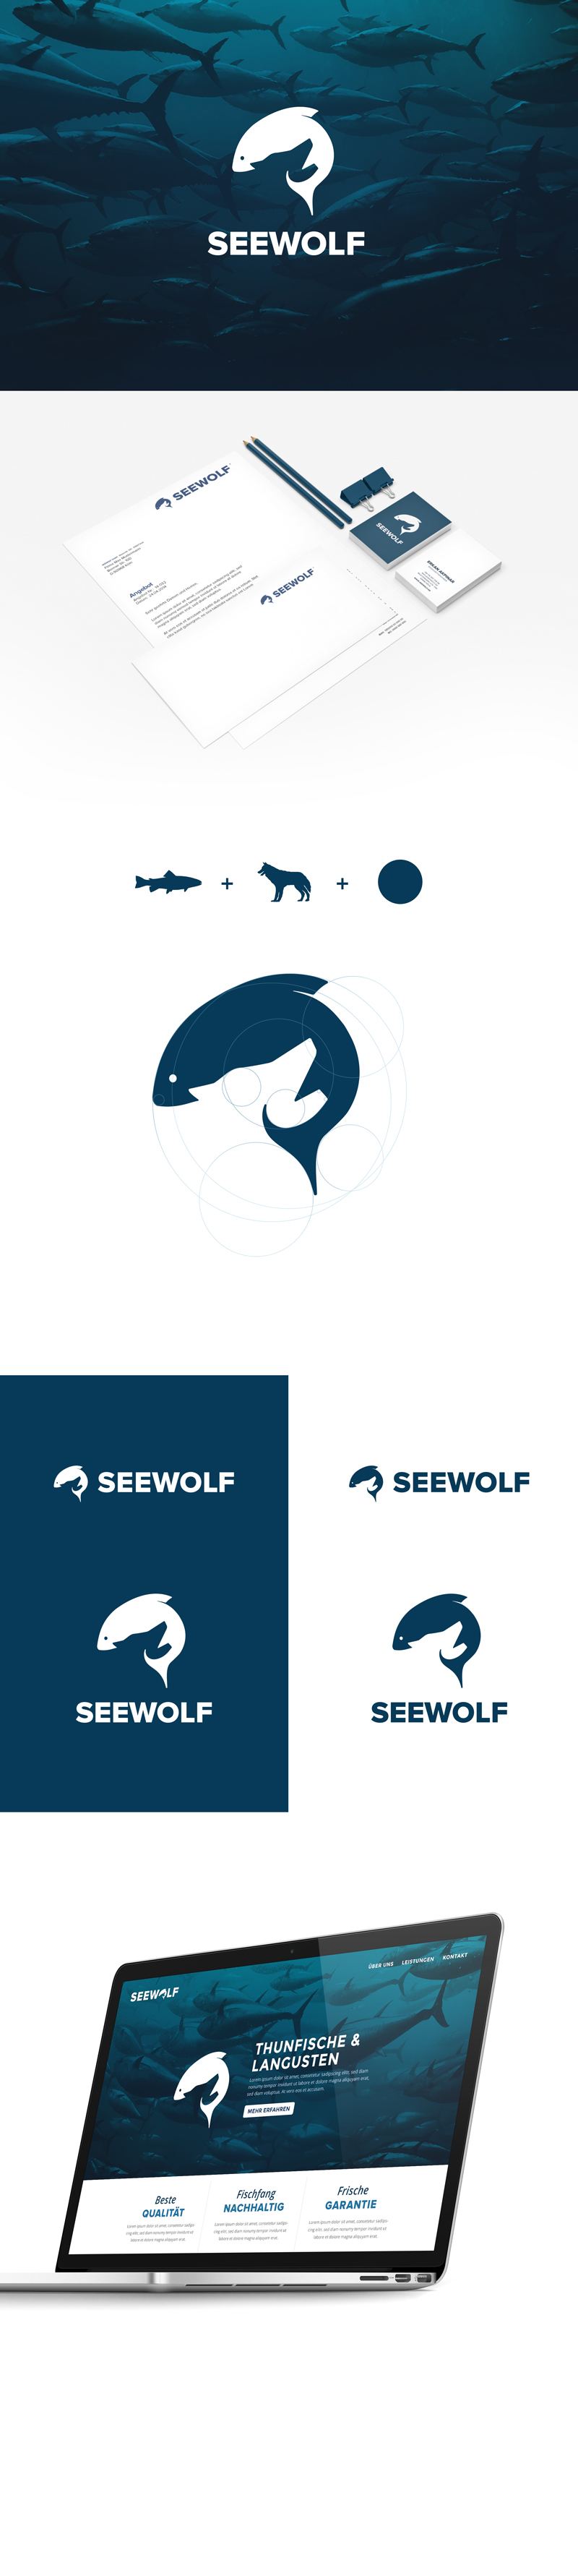 see sea fish wolf seawolf One Page flat design one pager minimal elegant parallax